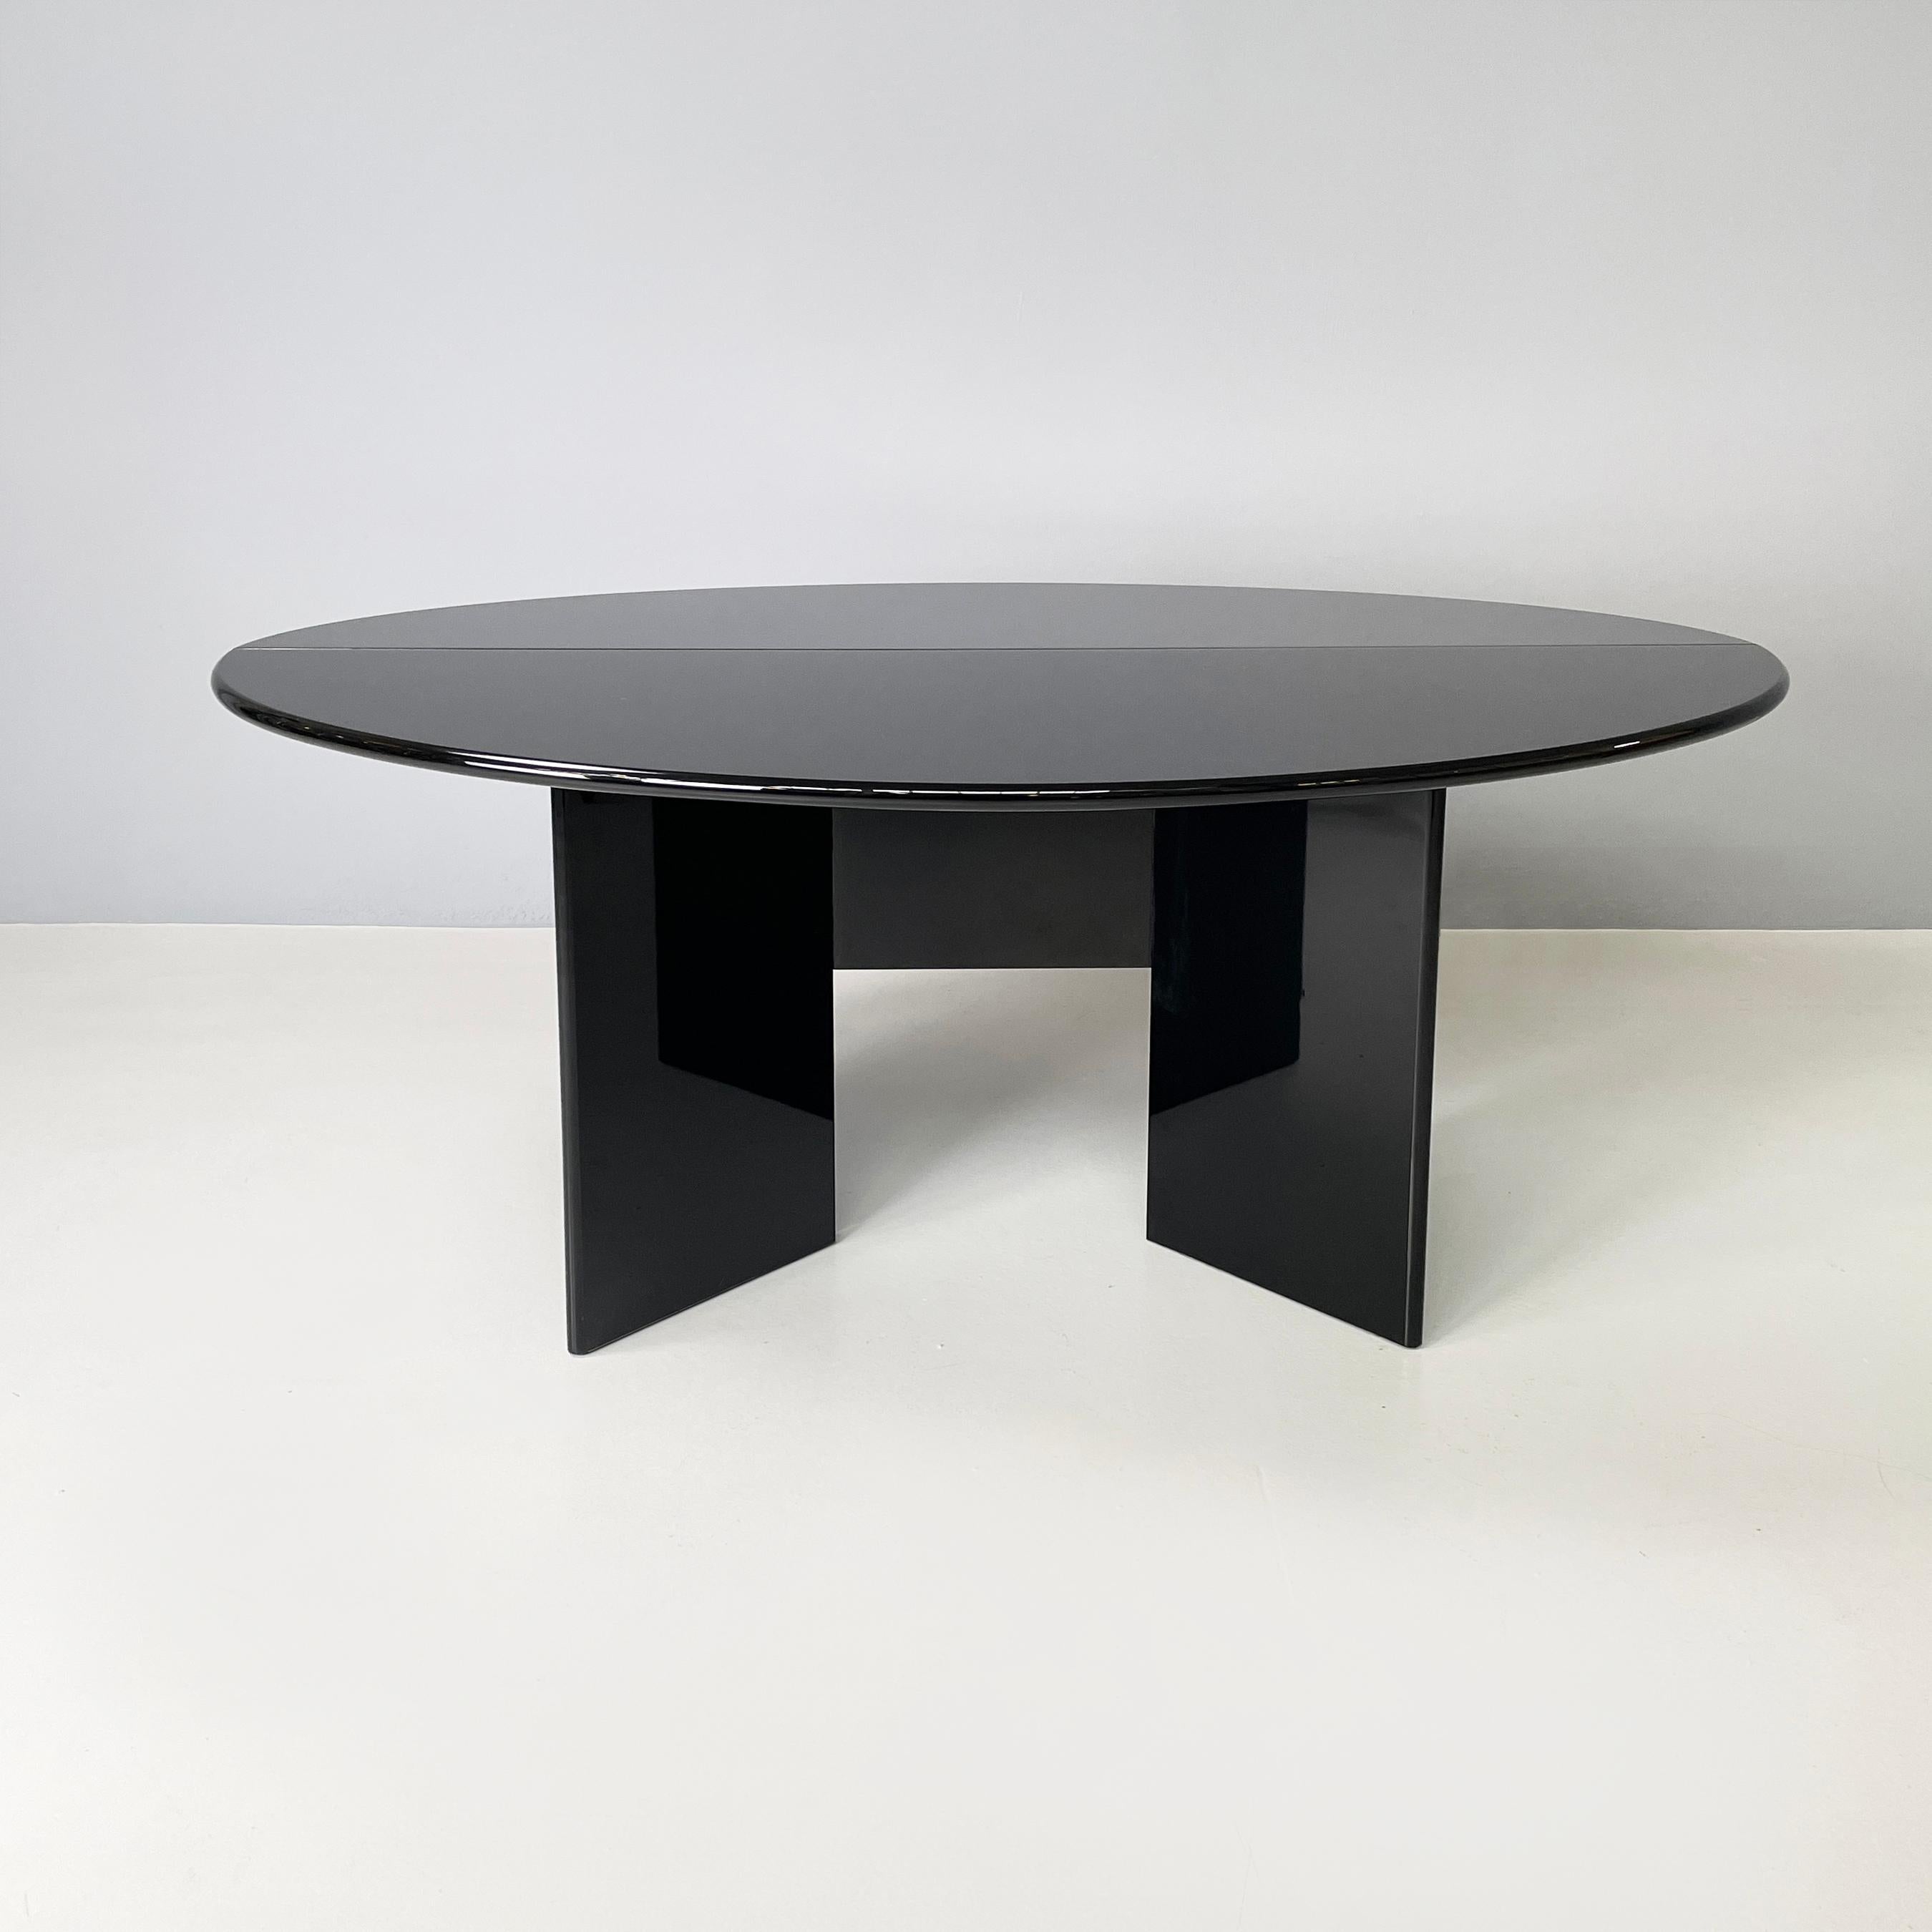 Modern Italian modern Black Dining table or console by Takahama for Cassina, 1970s